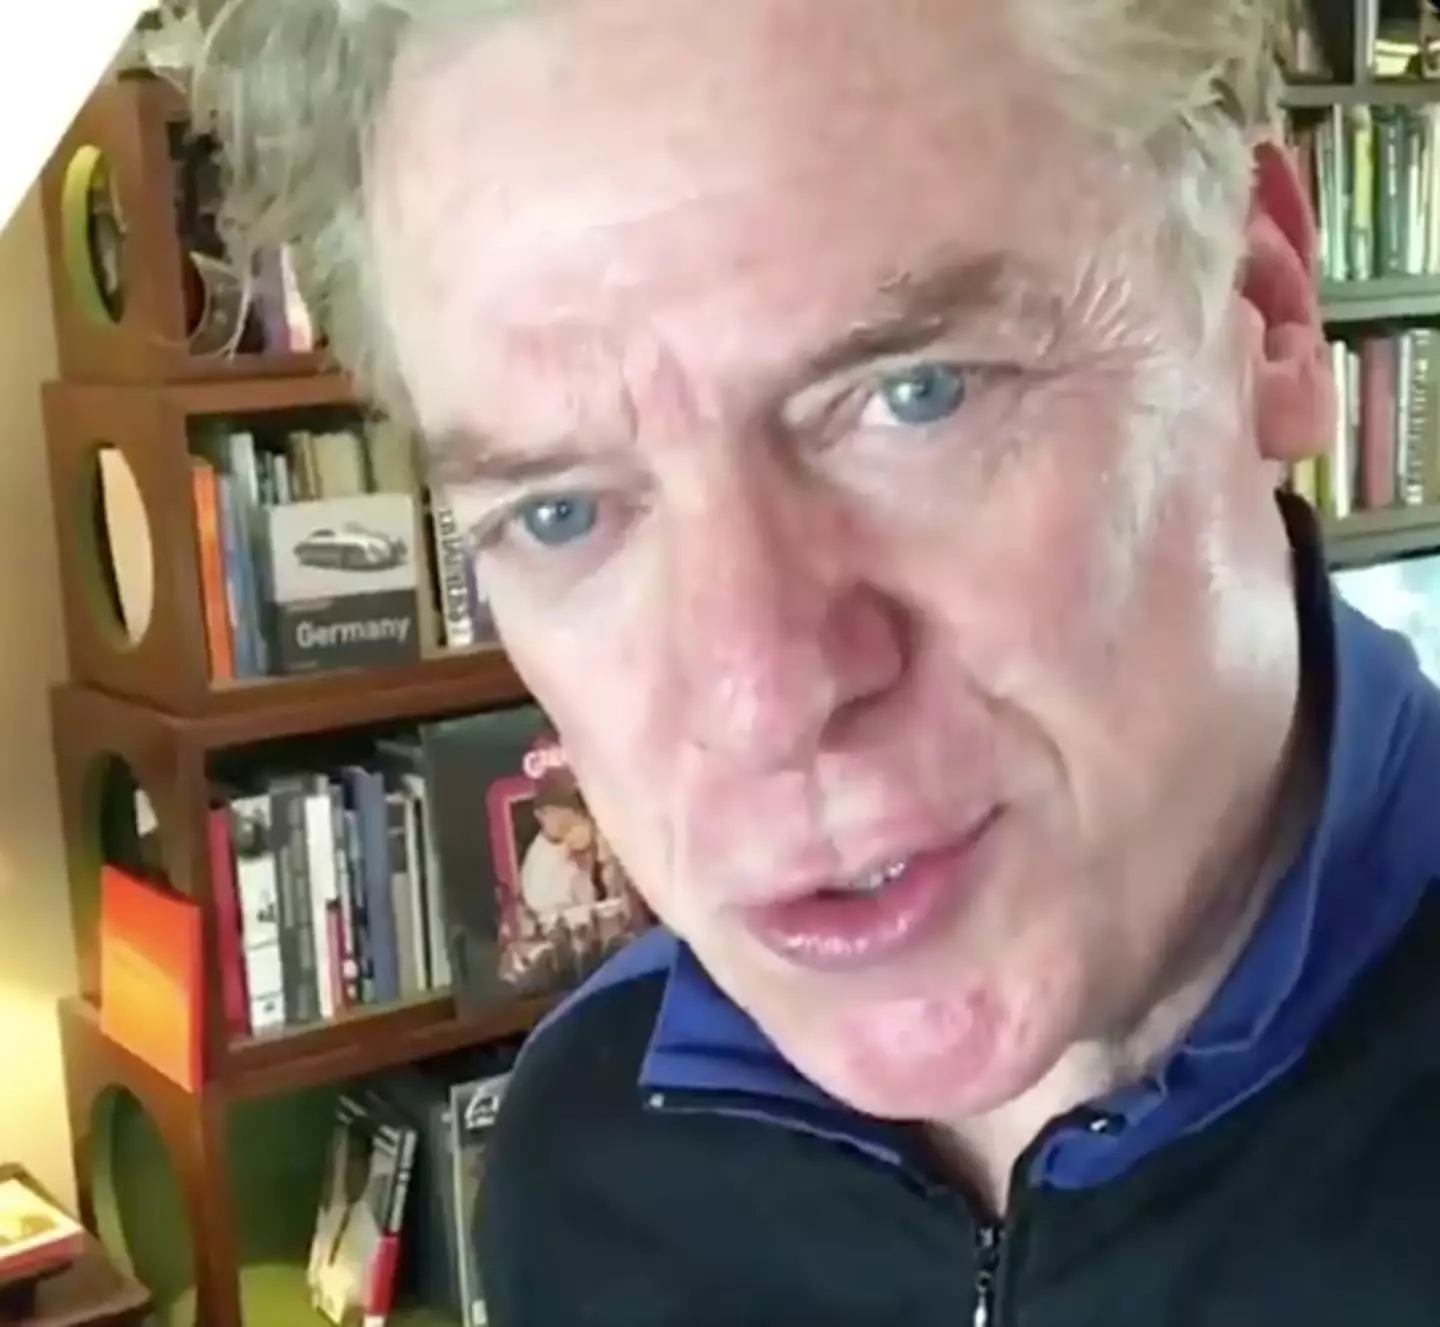 Christopher McDonald gave fans exactly what they wanted by responding as Shooter McGavin.